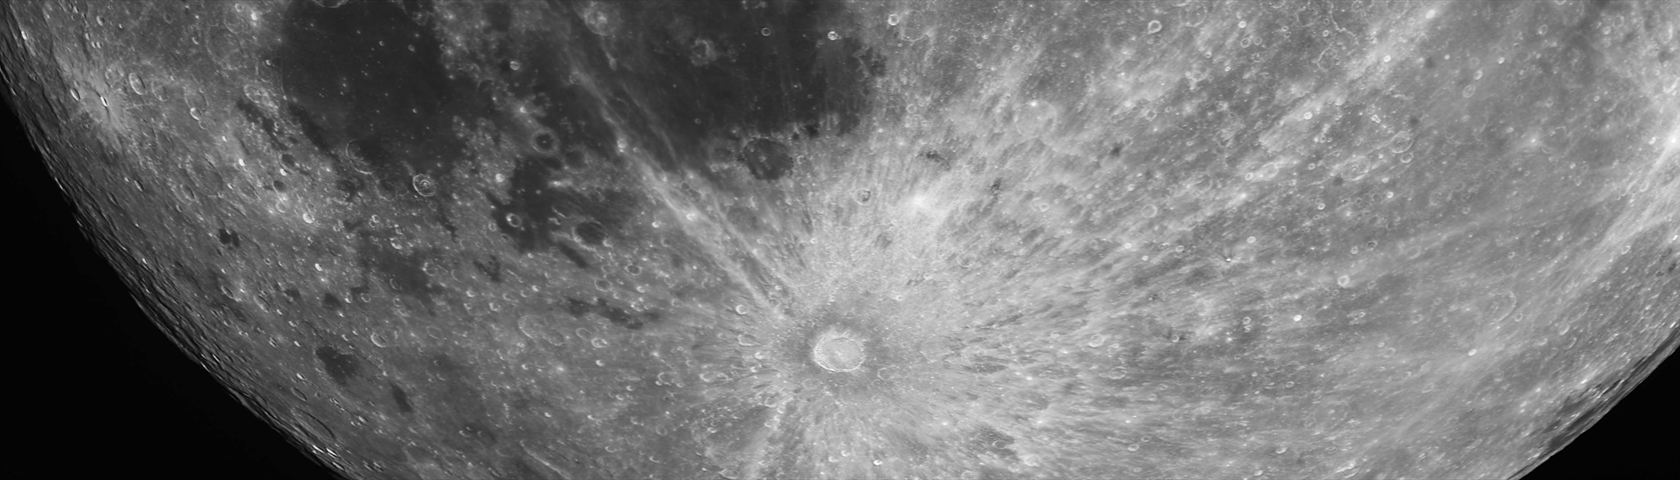 Crater on the Moon